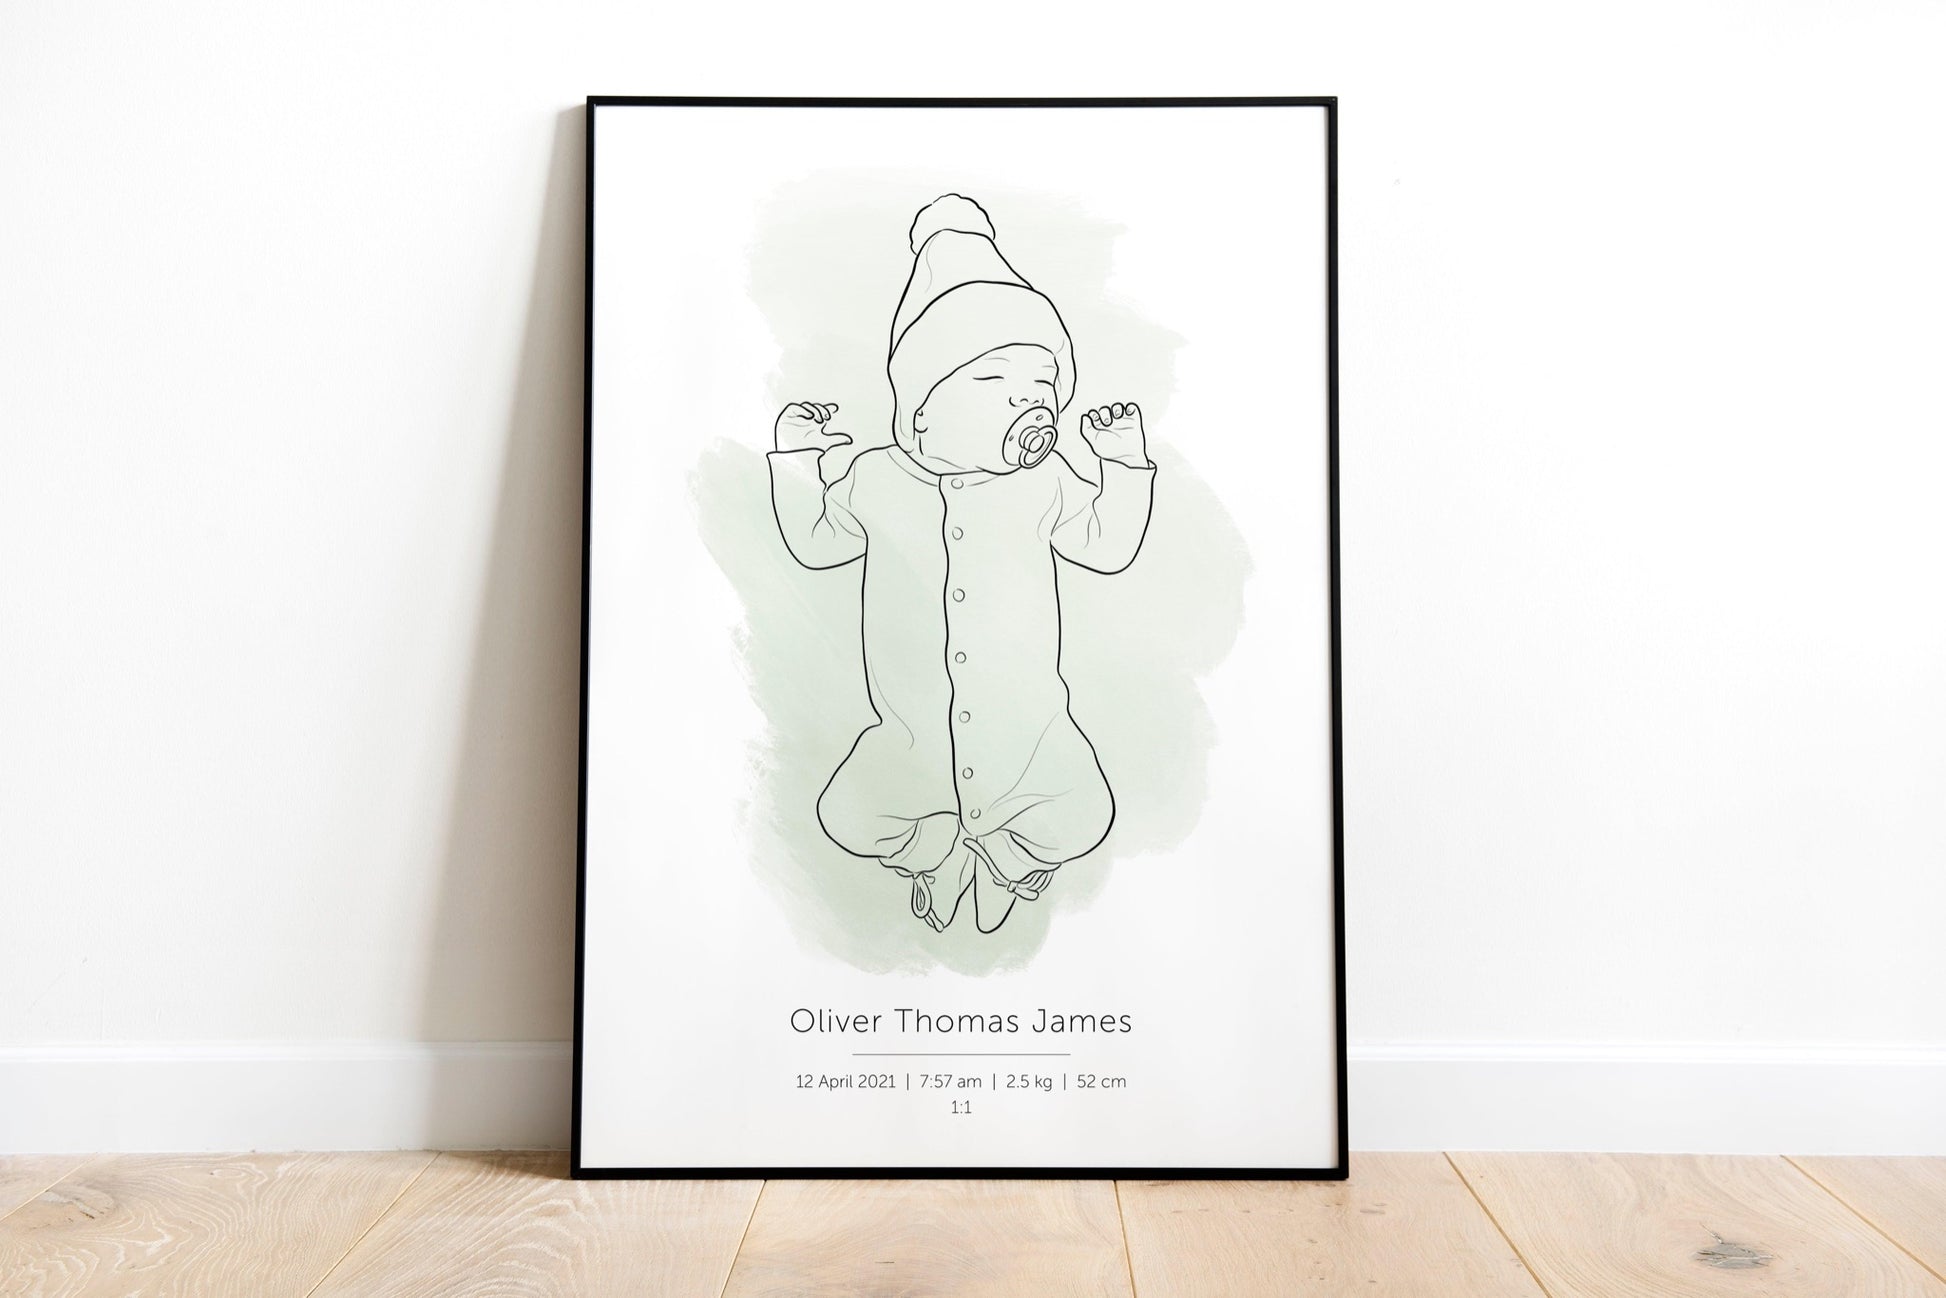 Custom made birth poster with watercolor wash in 1:1 scale with a detailed hand drawn portrait of the baby